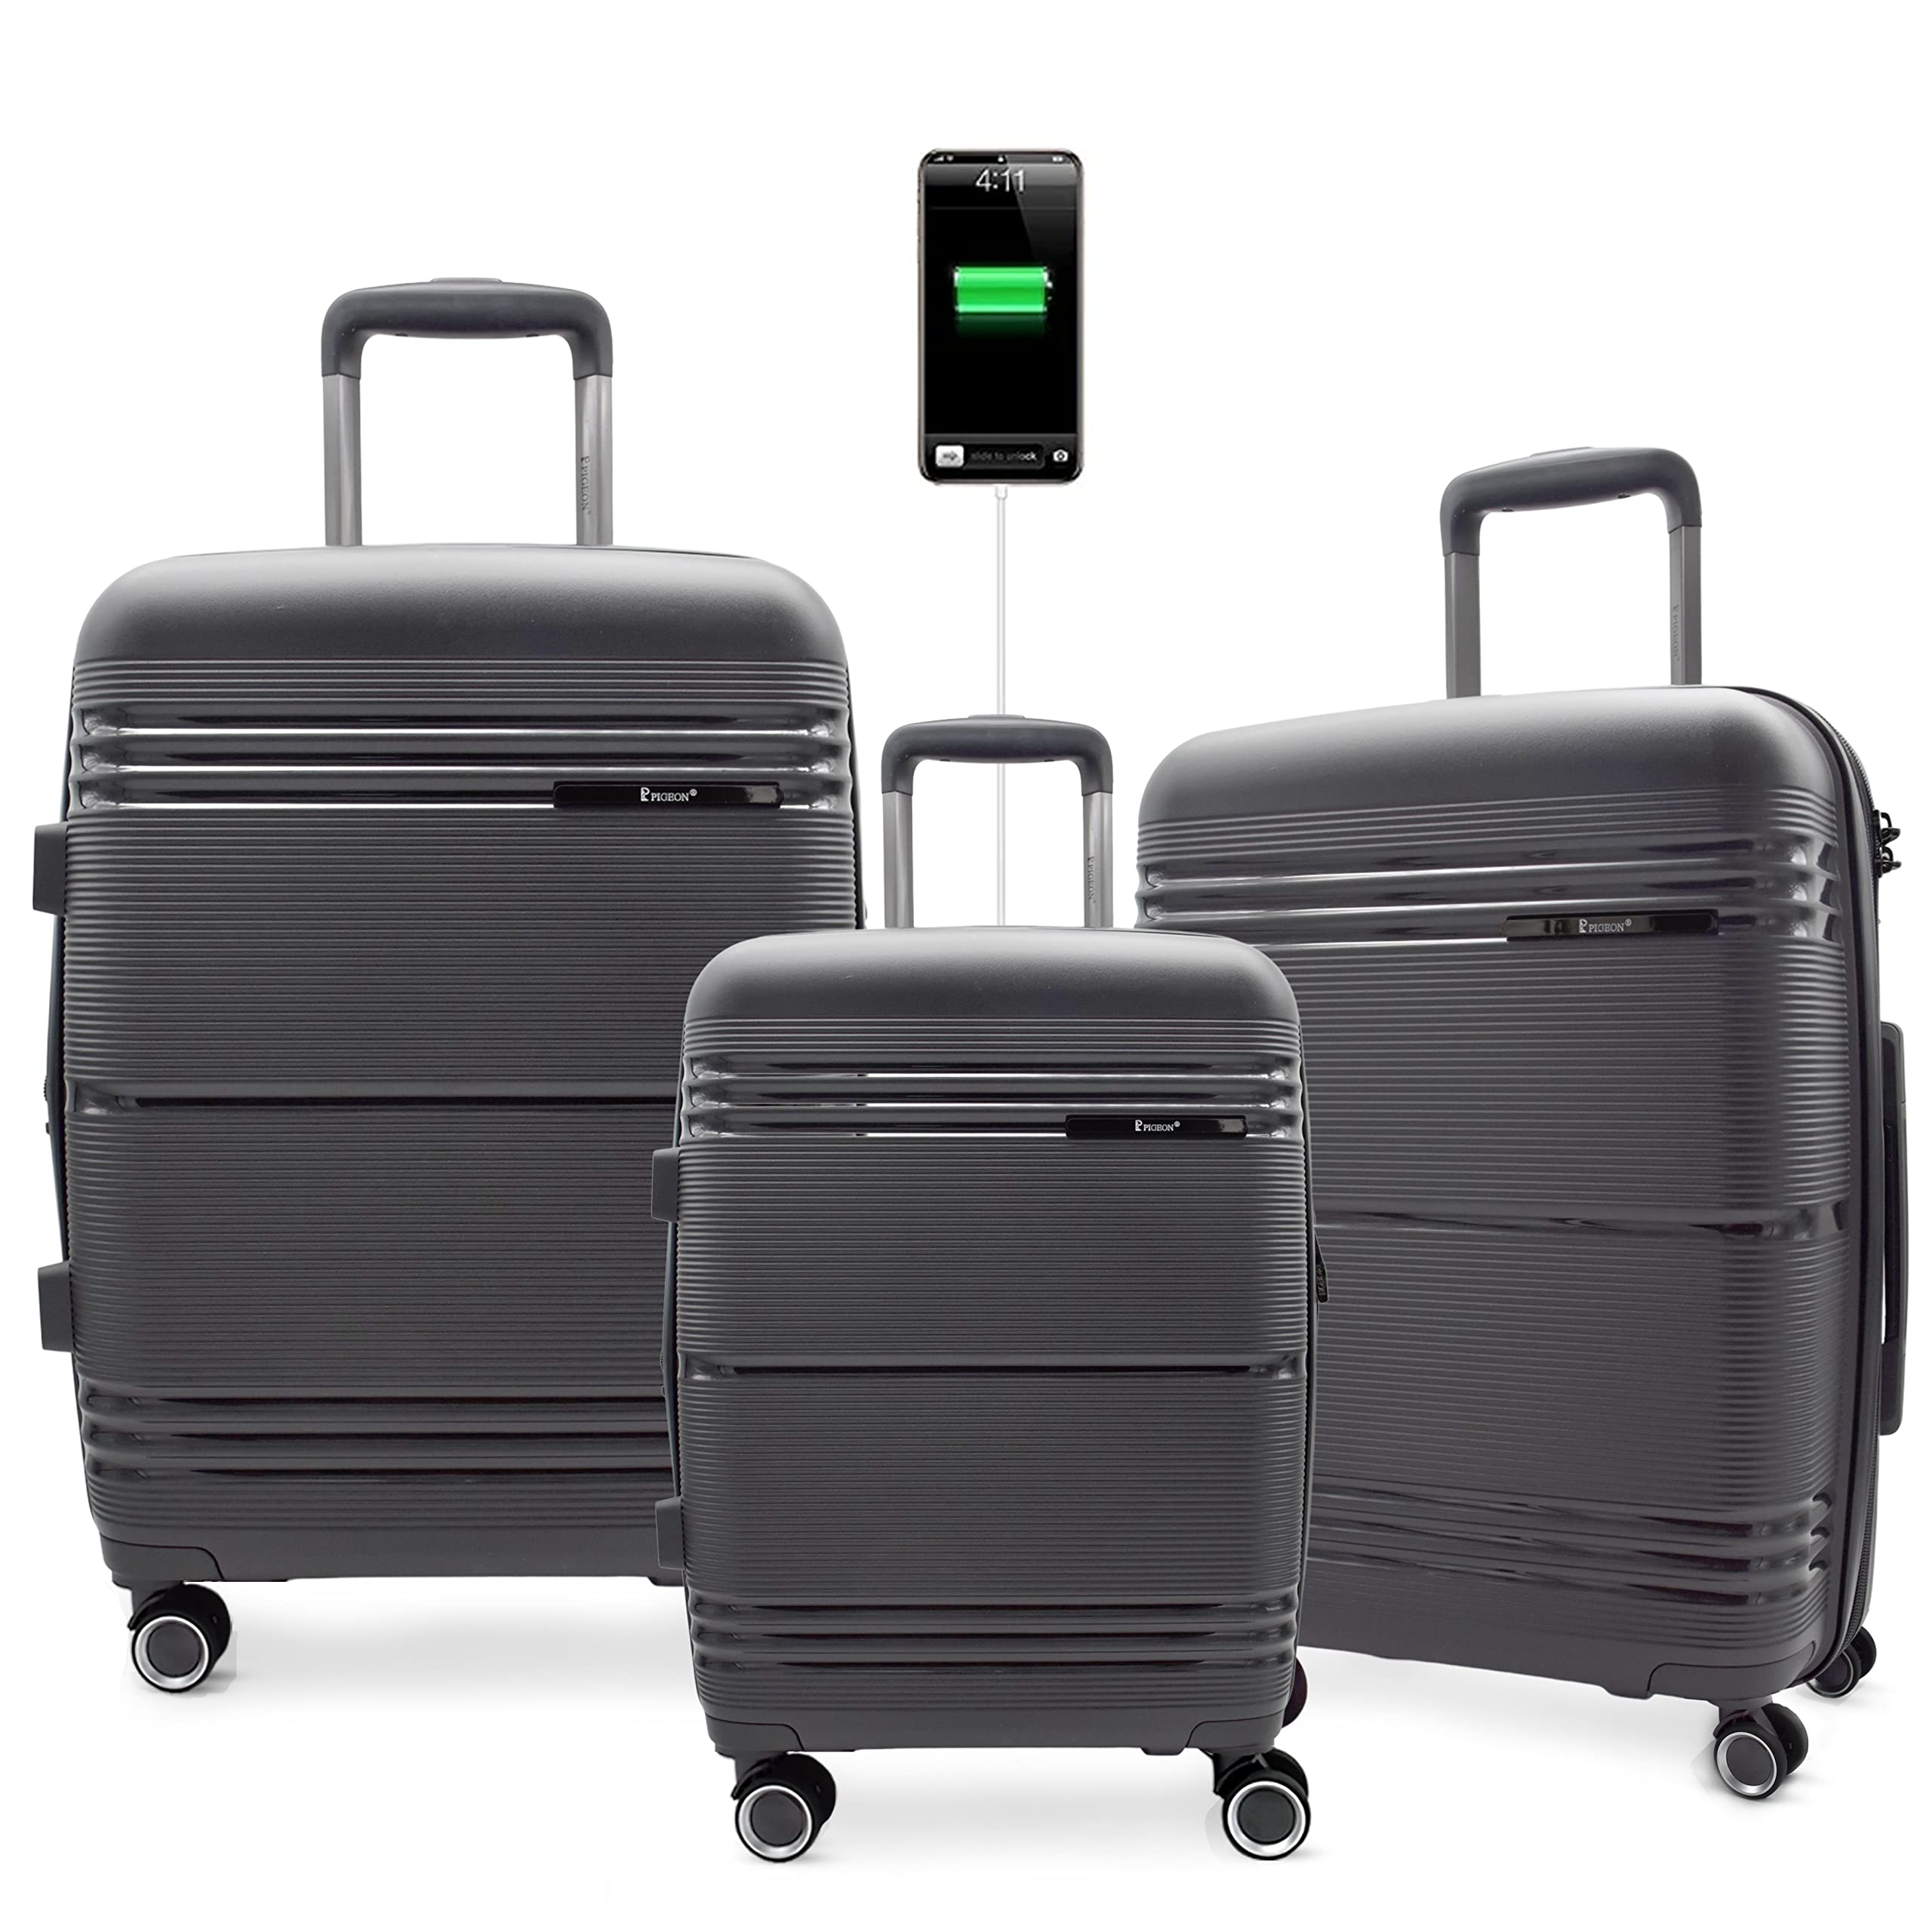 PIGEON hard shell Unbreakable suitcase set with Protective Shell